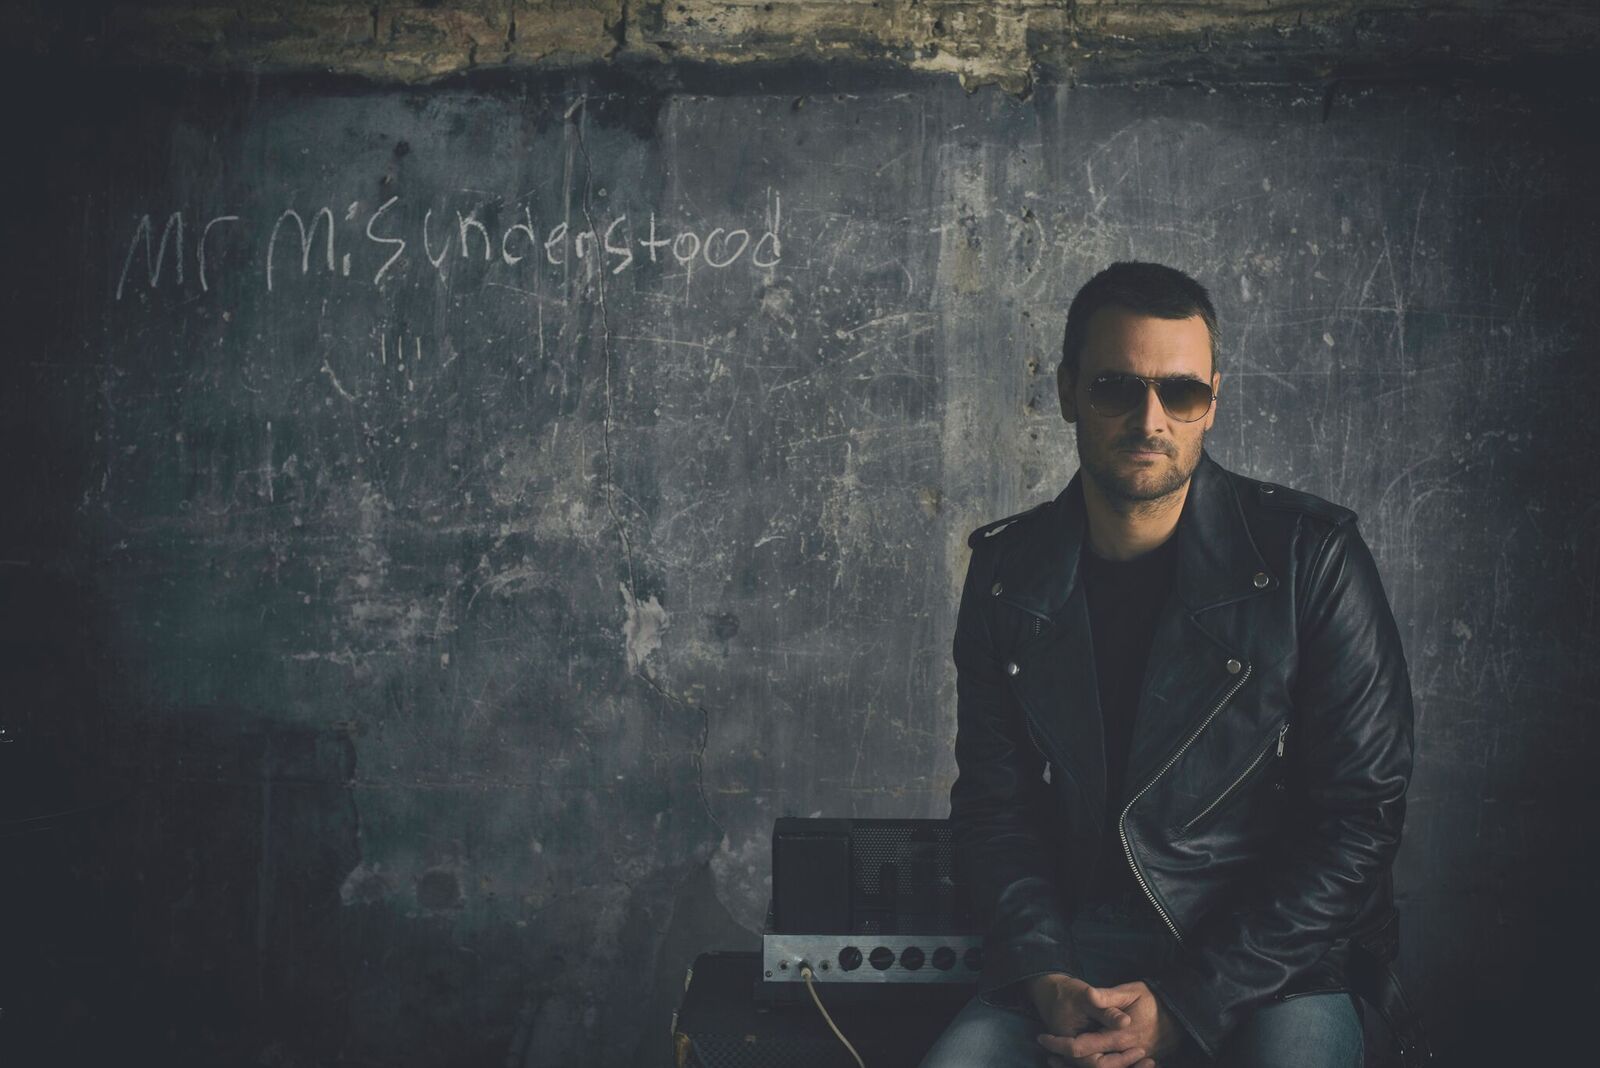 Country superstar Eric Church comes to Maui for his first-ever concert Friday, December 2 at the MACC along with several friends including Lee Ann Womack, Lucas Nelson, Robert Earl Keen, Shawn Camp, Liz Rose, Charlie Worsham plus some special surprise guests. Photo: John Peets via MACC.